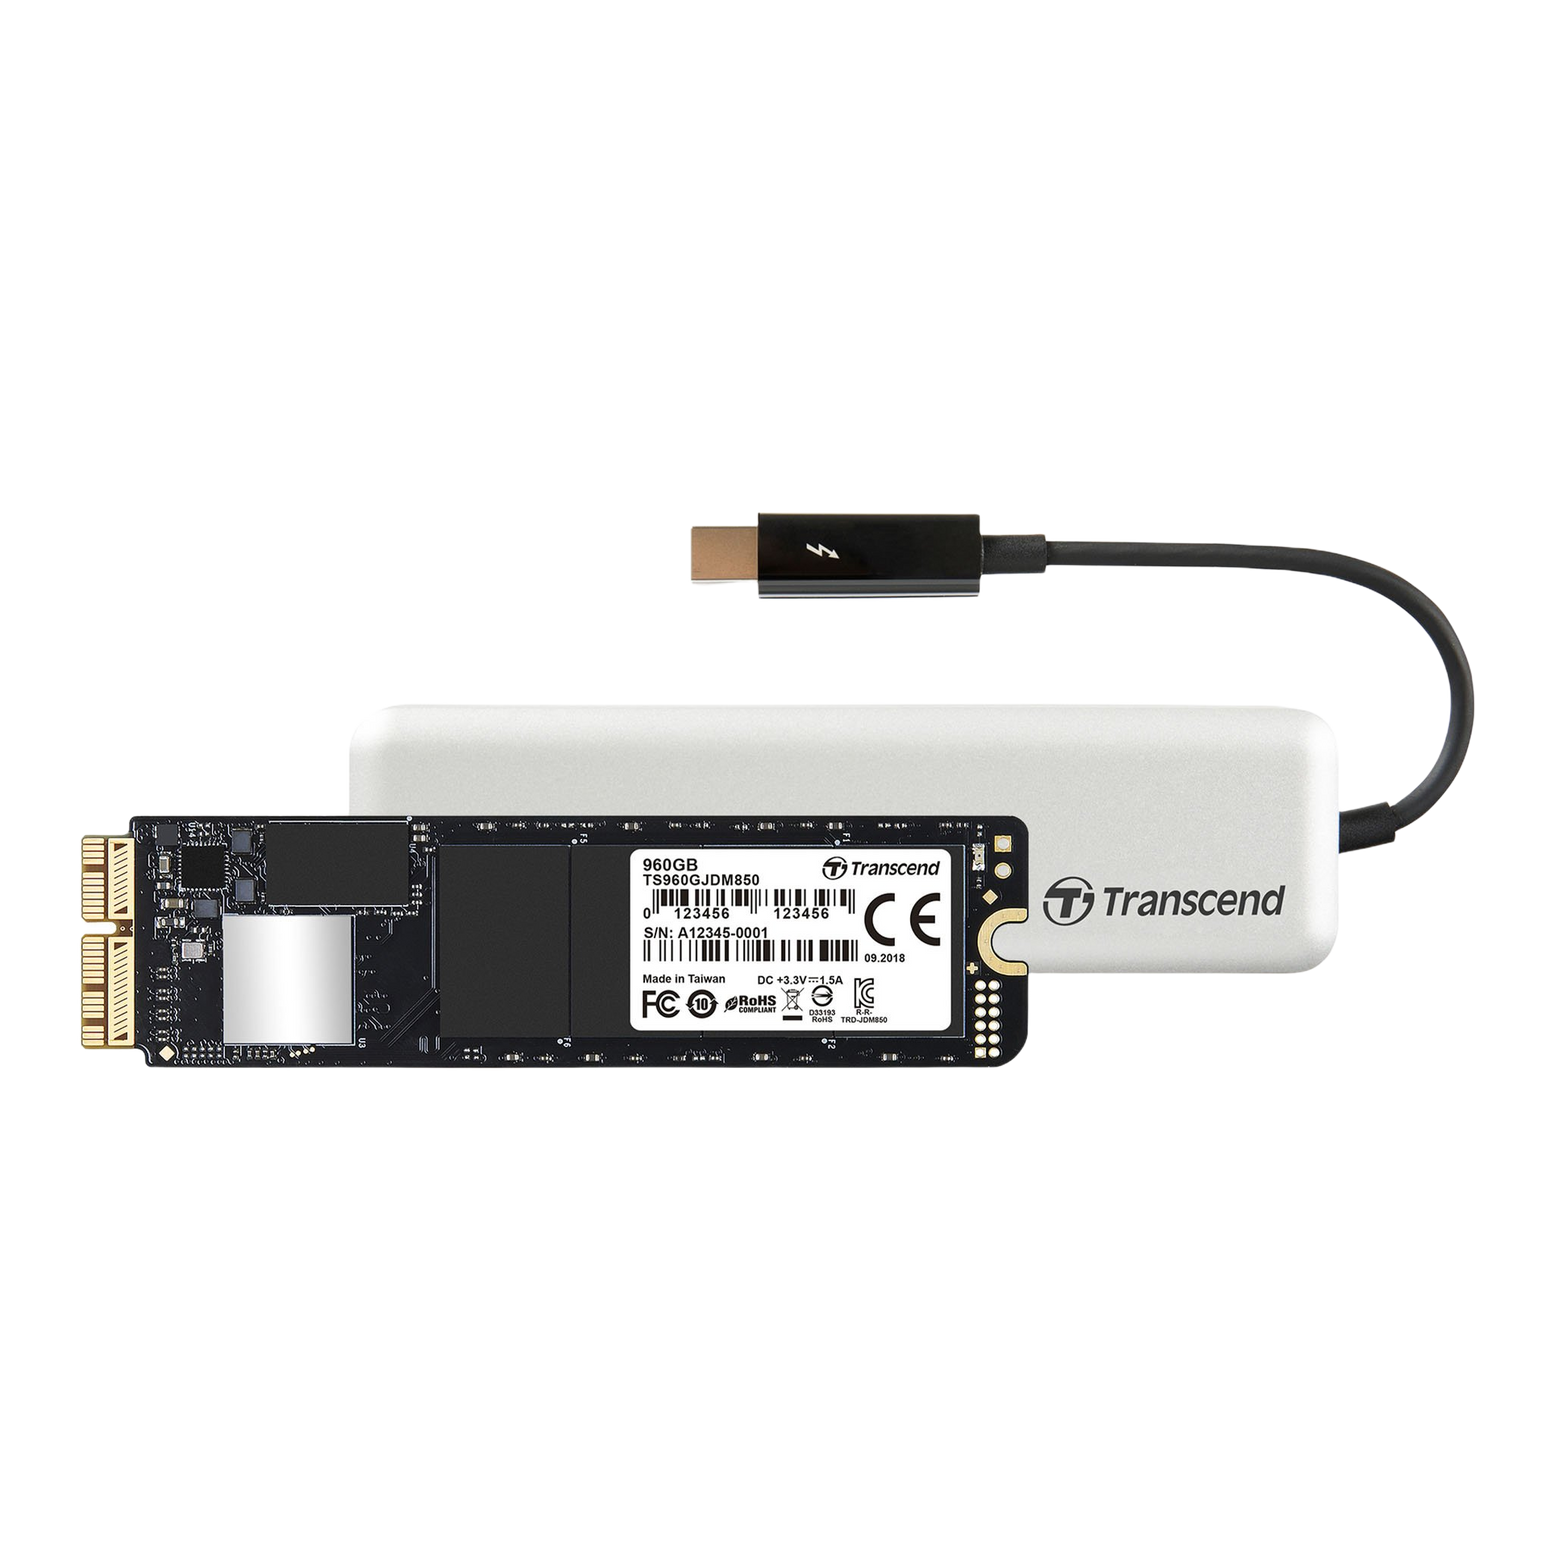 Transcend 240GB Jet Drive 855 Upgrade Kit for MacBook Pro (Late 2013 - Early 2015), MacBook Air (Mid 2013 - Early 2015), Mac mini (Late 2014), Mac Pro (Late 2013) - NVMe Gen3 x4